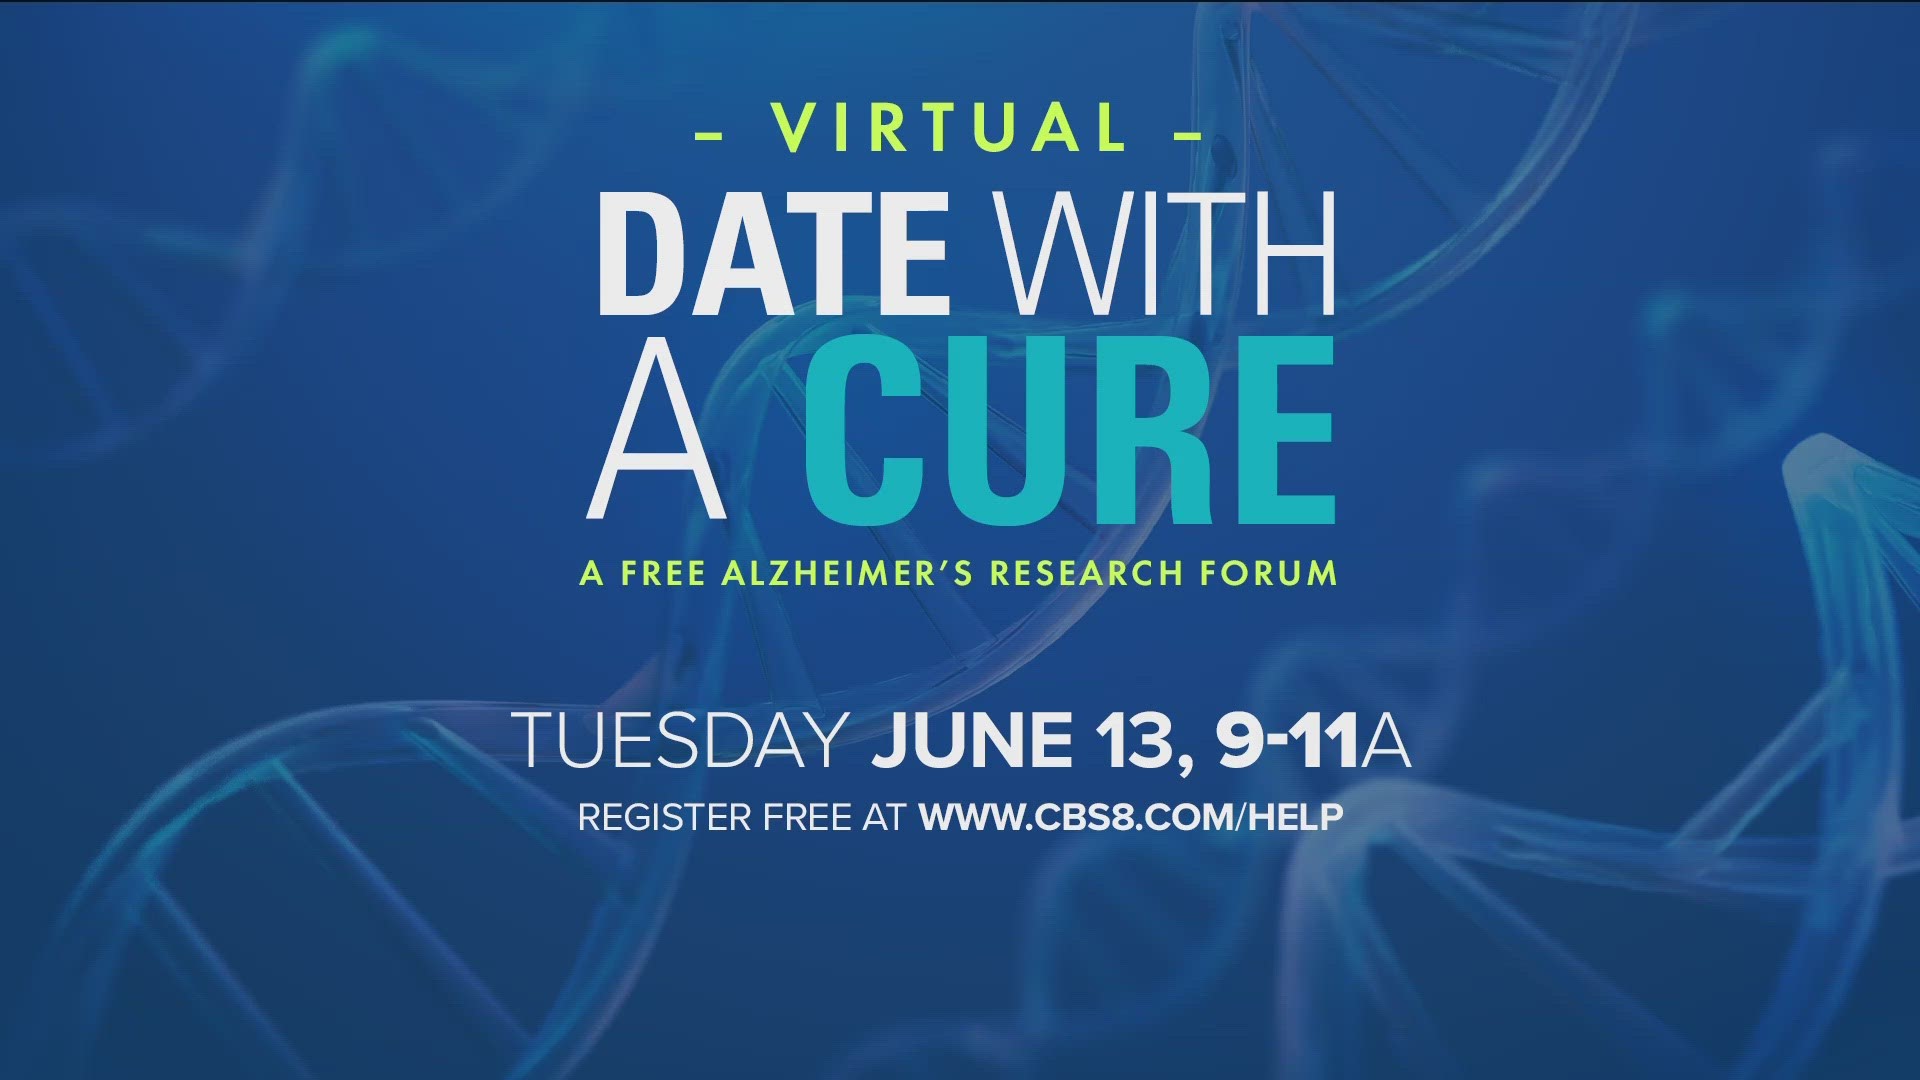 San Diego is home to some of the best and brightest Alzheimer’s researchers and institutions. Every year, they come together at a free event, Date With A Cure.